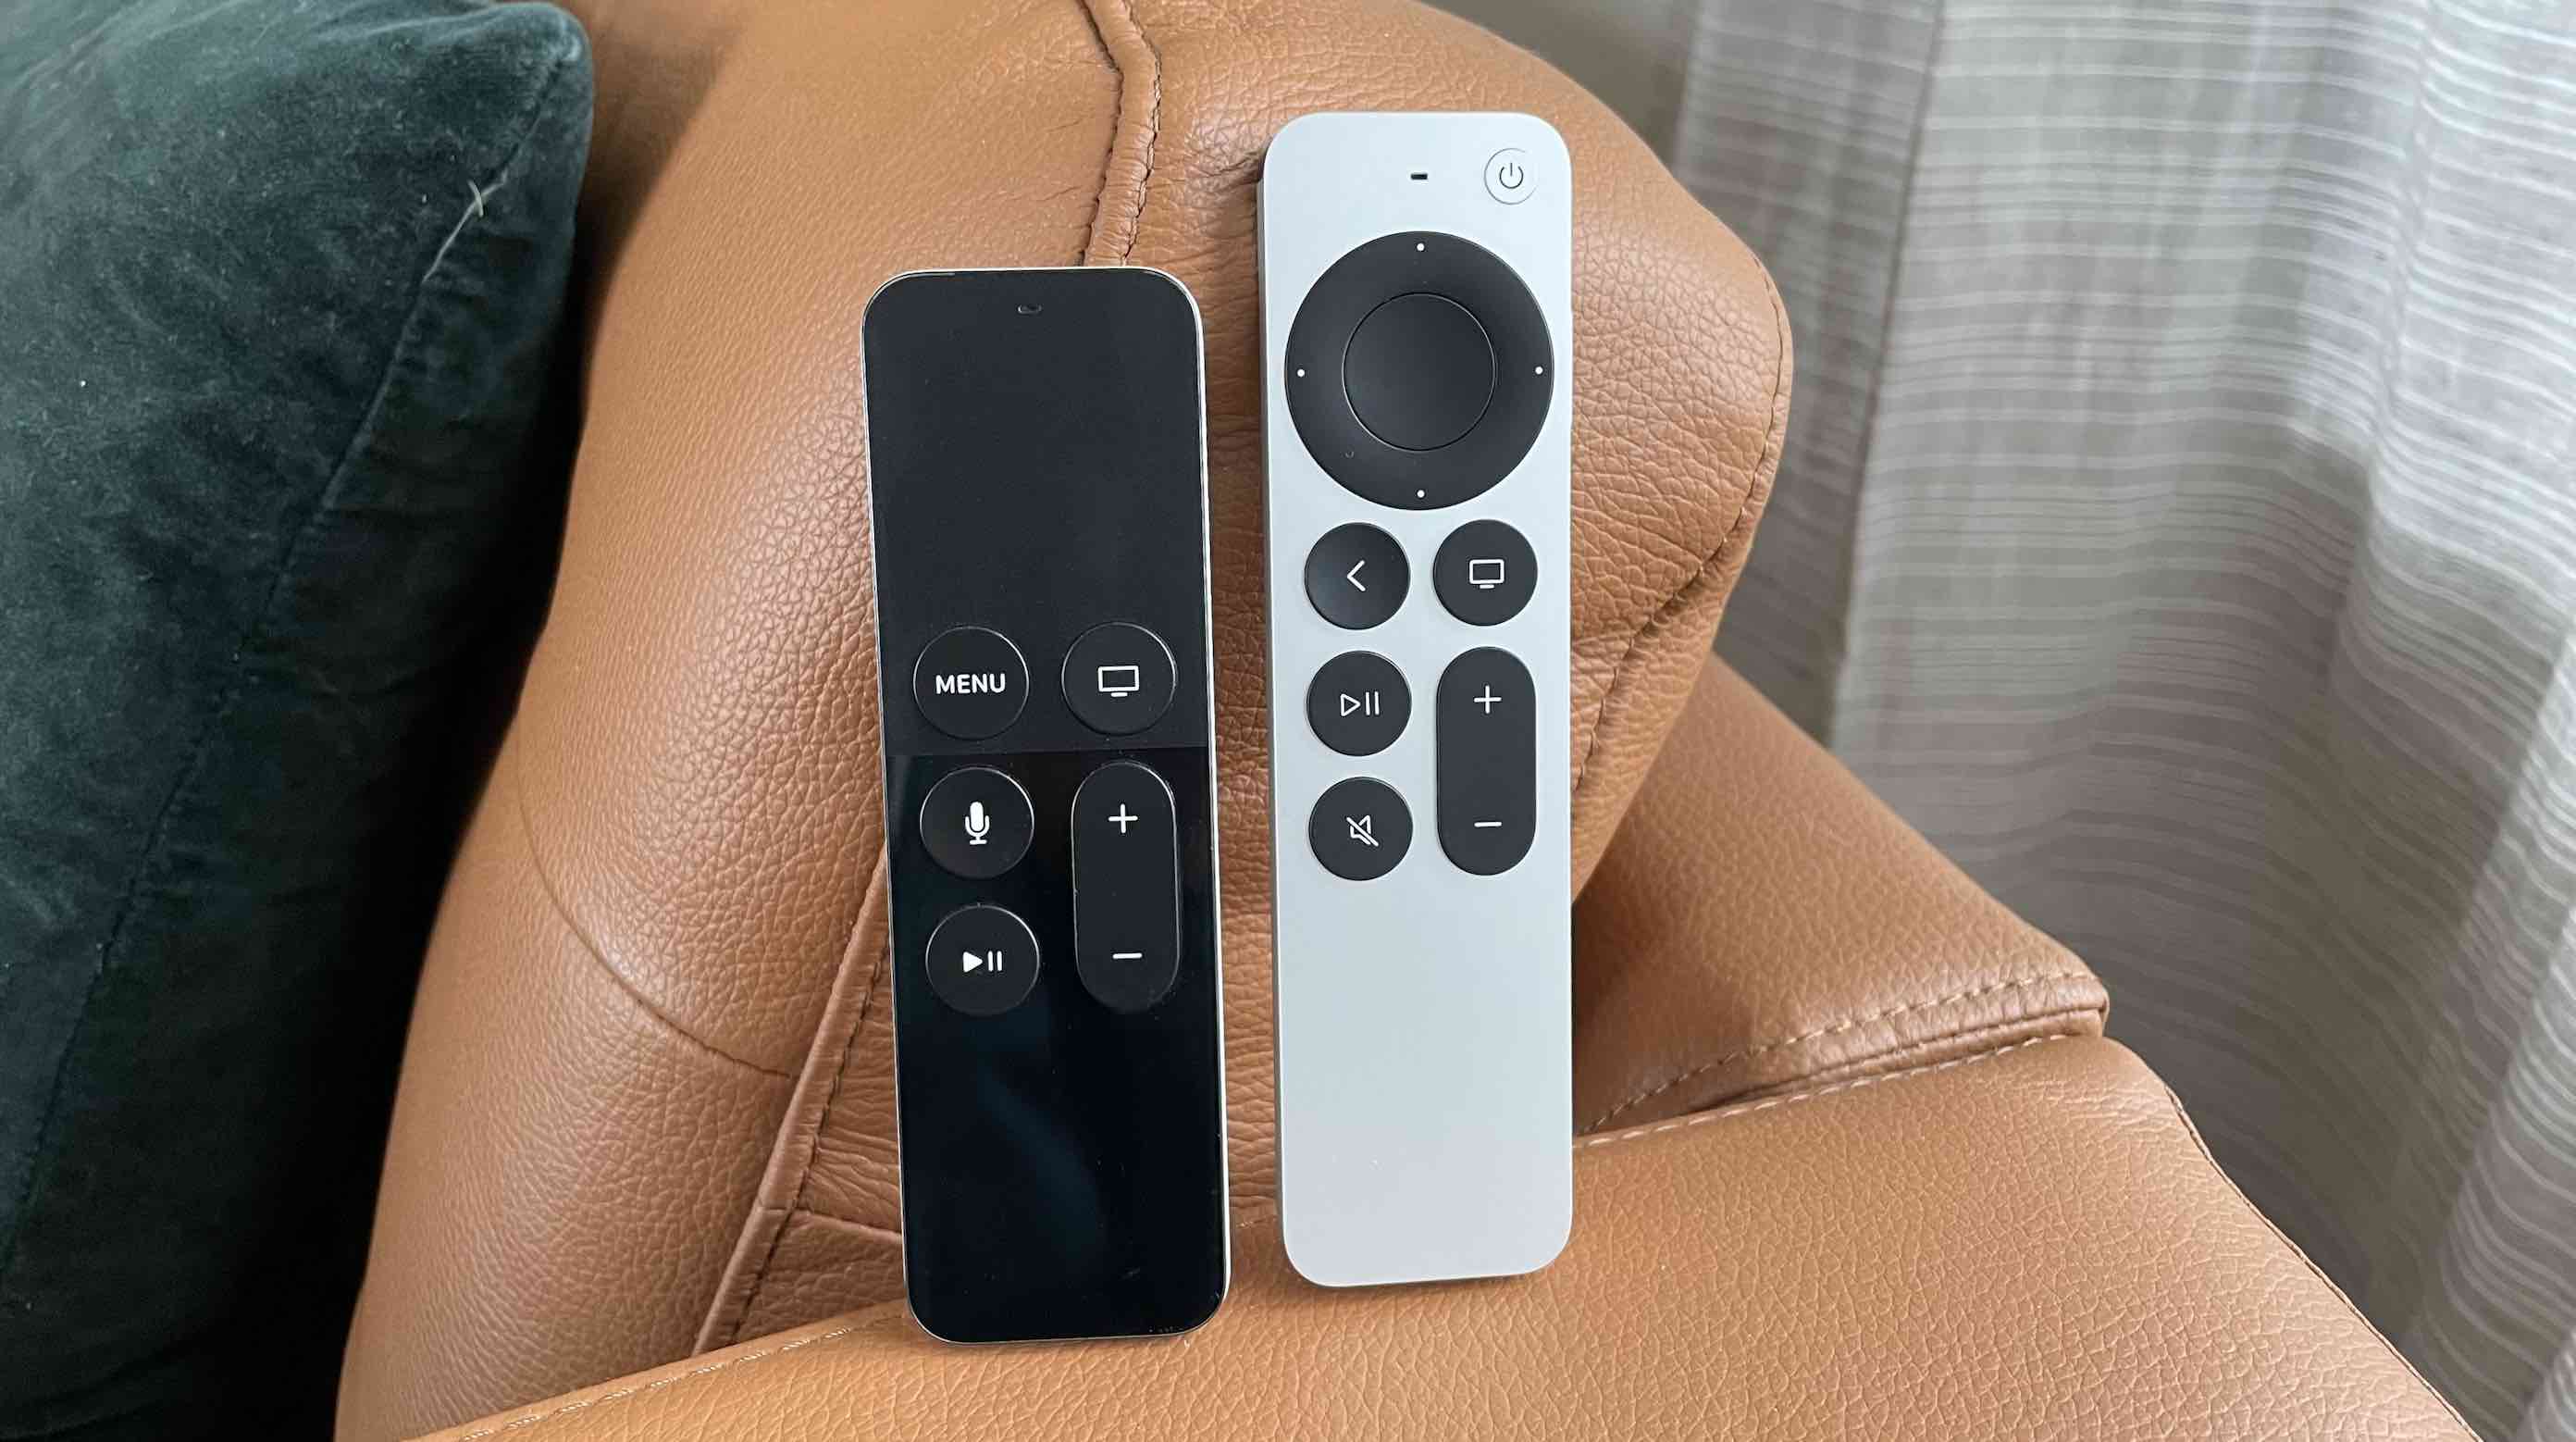 Lodge bunker nationalisme Apple TV Remote not working? Here are 6 ways to fix it - 9to5Mac